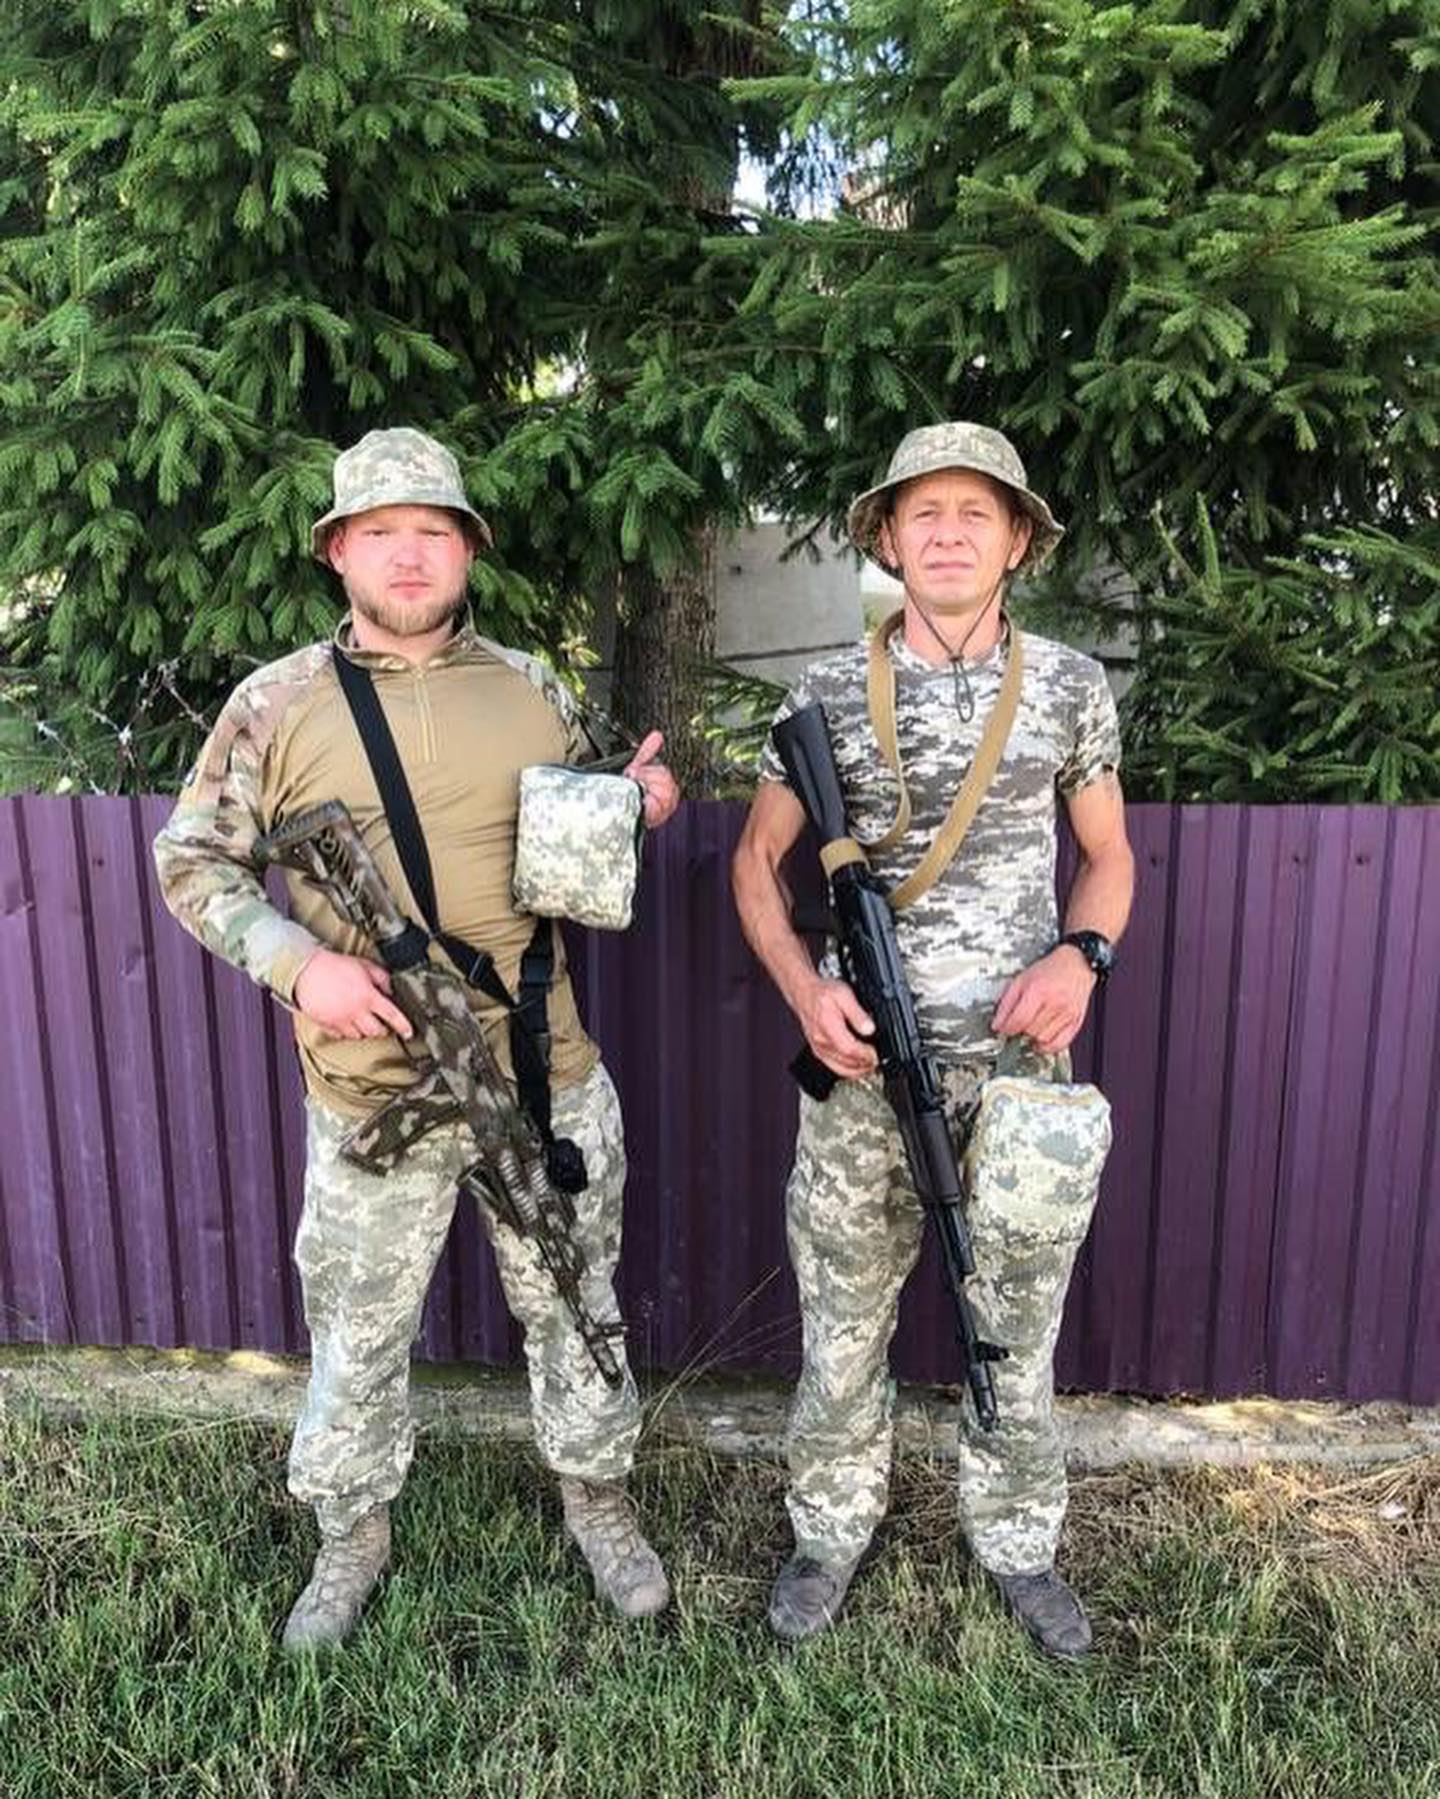 Two men in camouflage standing next to a fence.